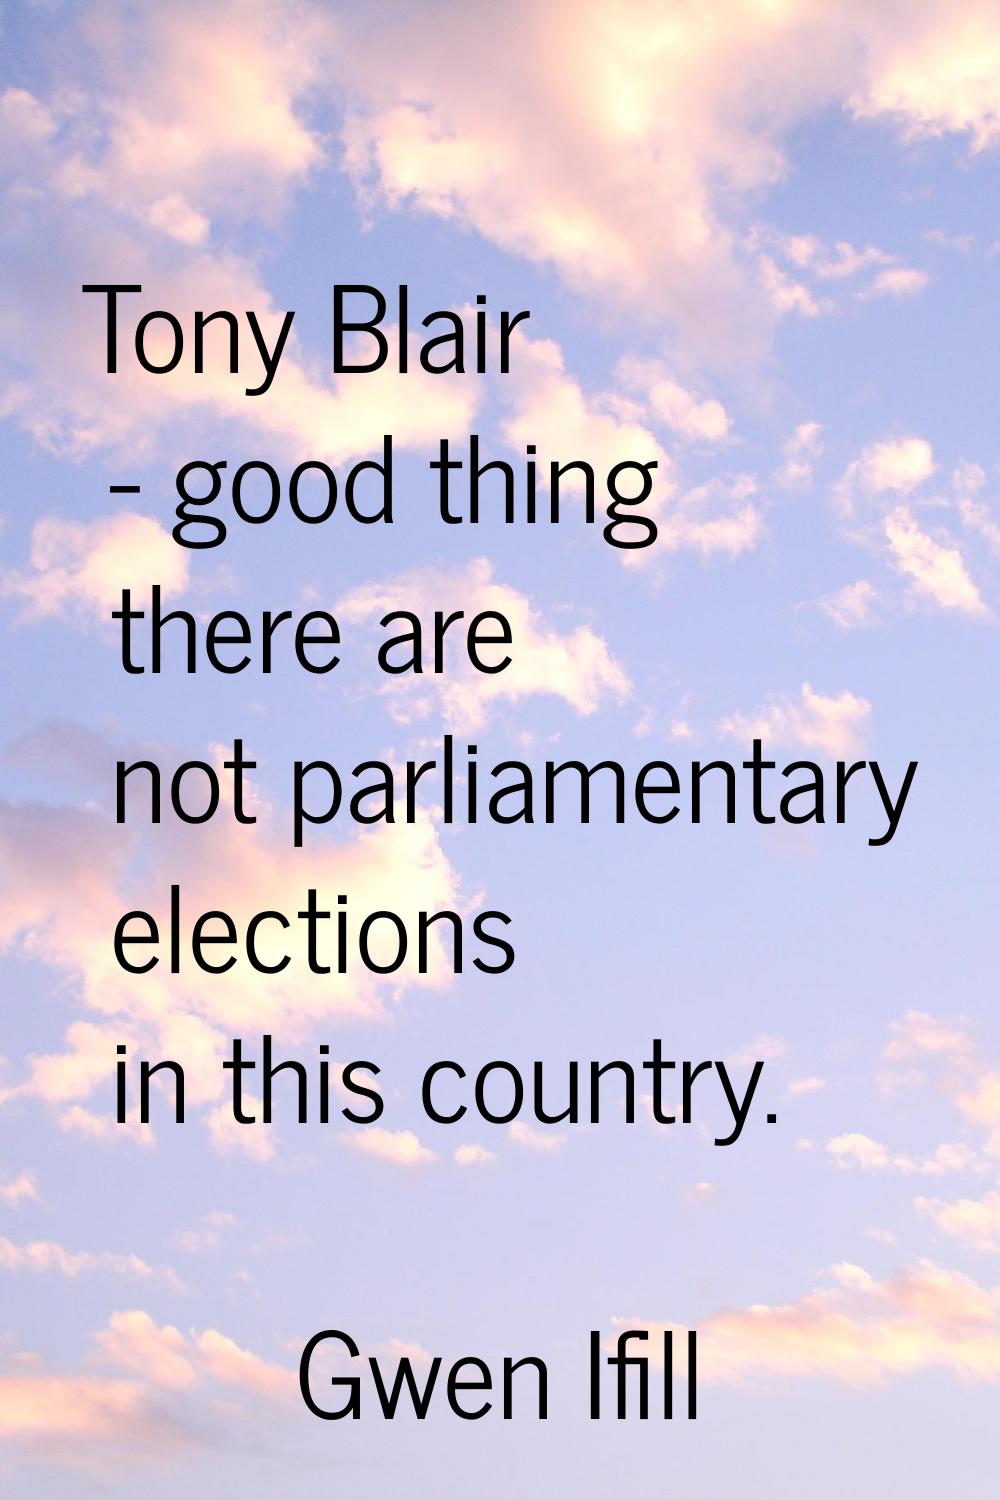 Tony Blair - good thing there are not parliamentary elections in this country.